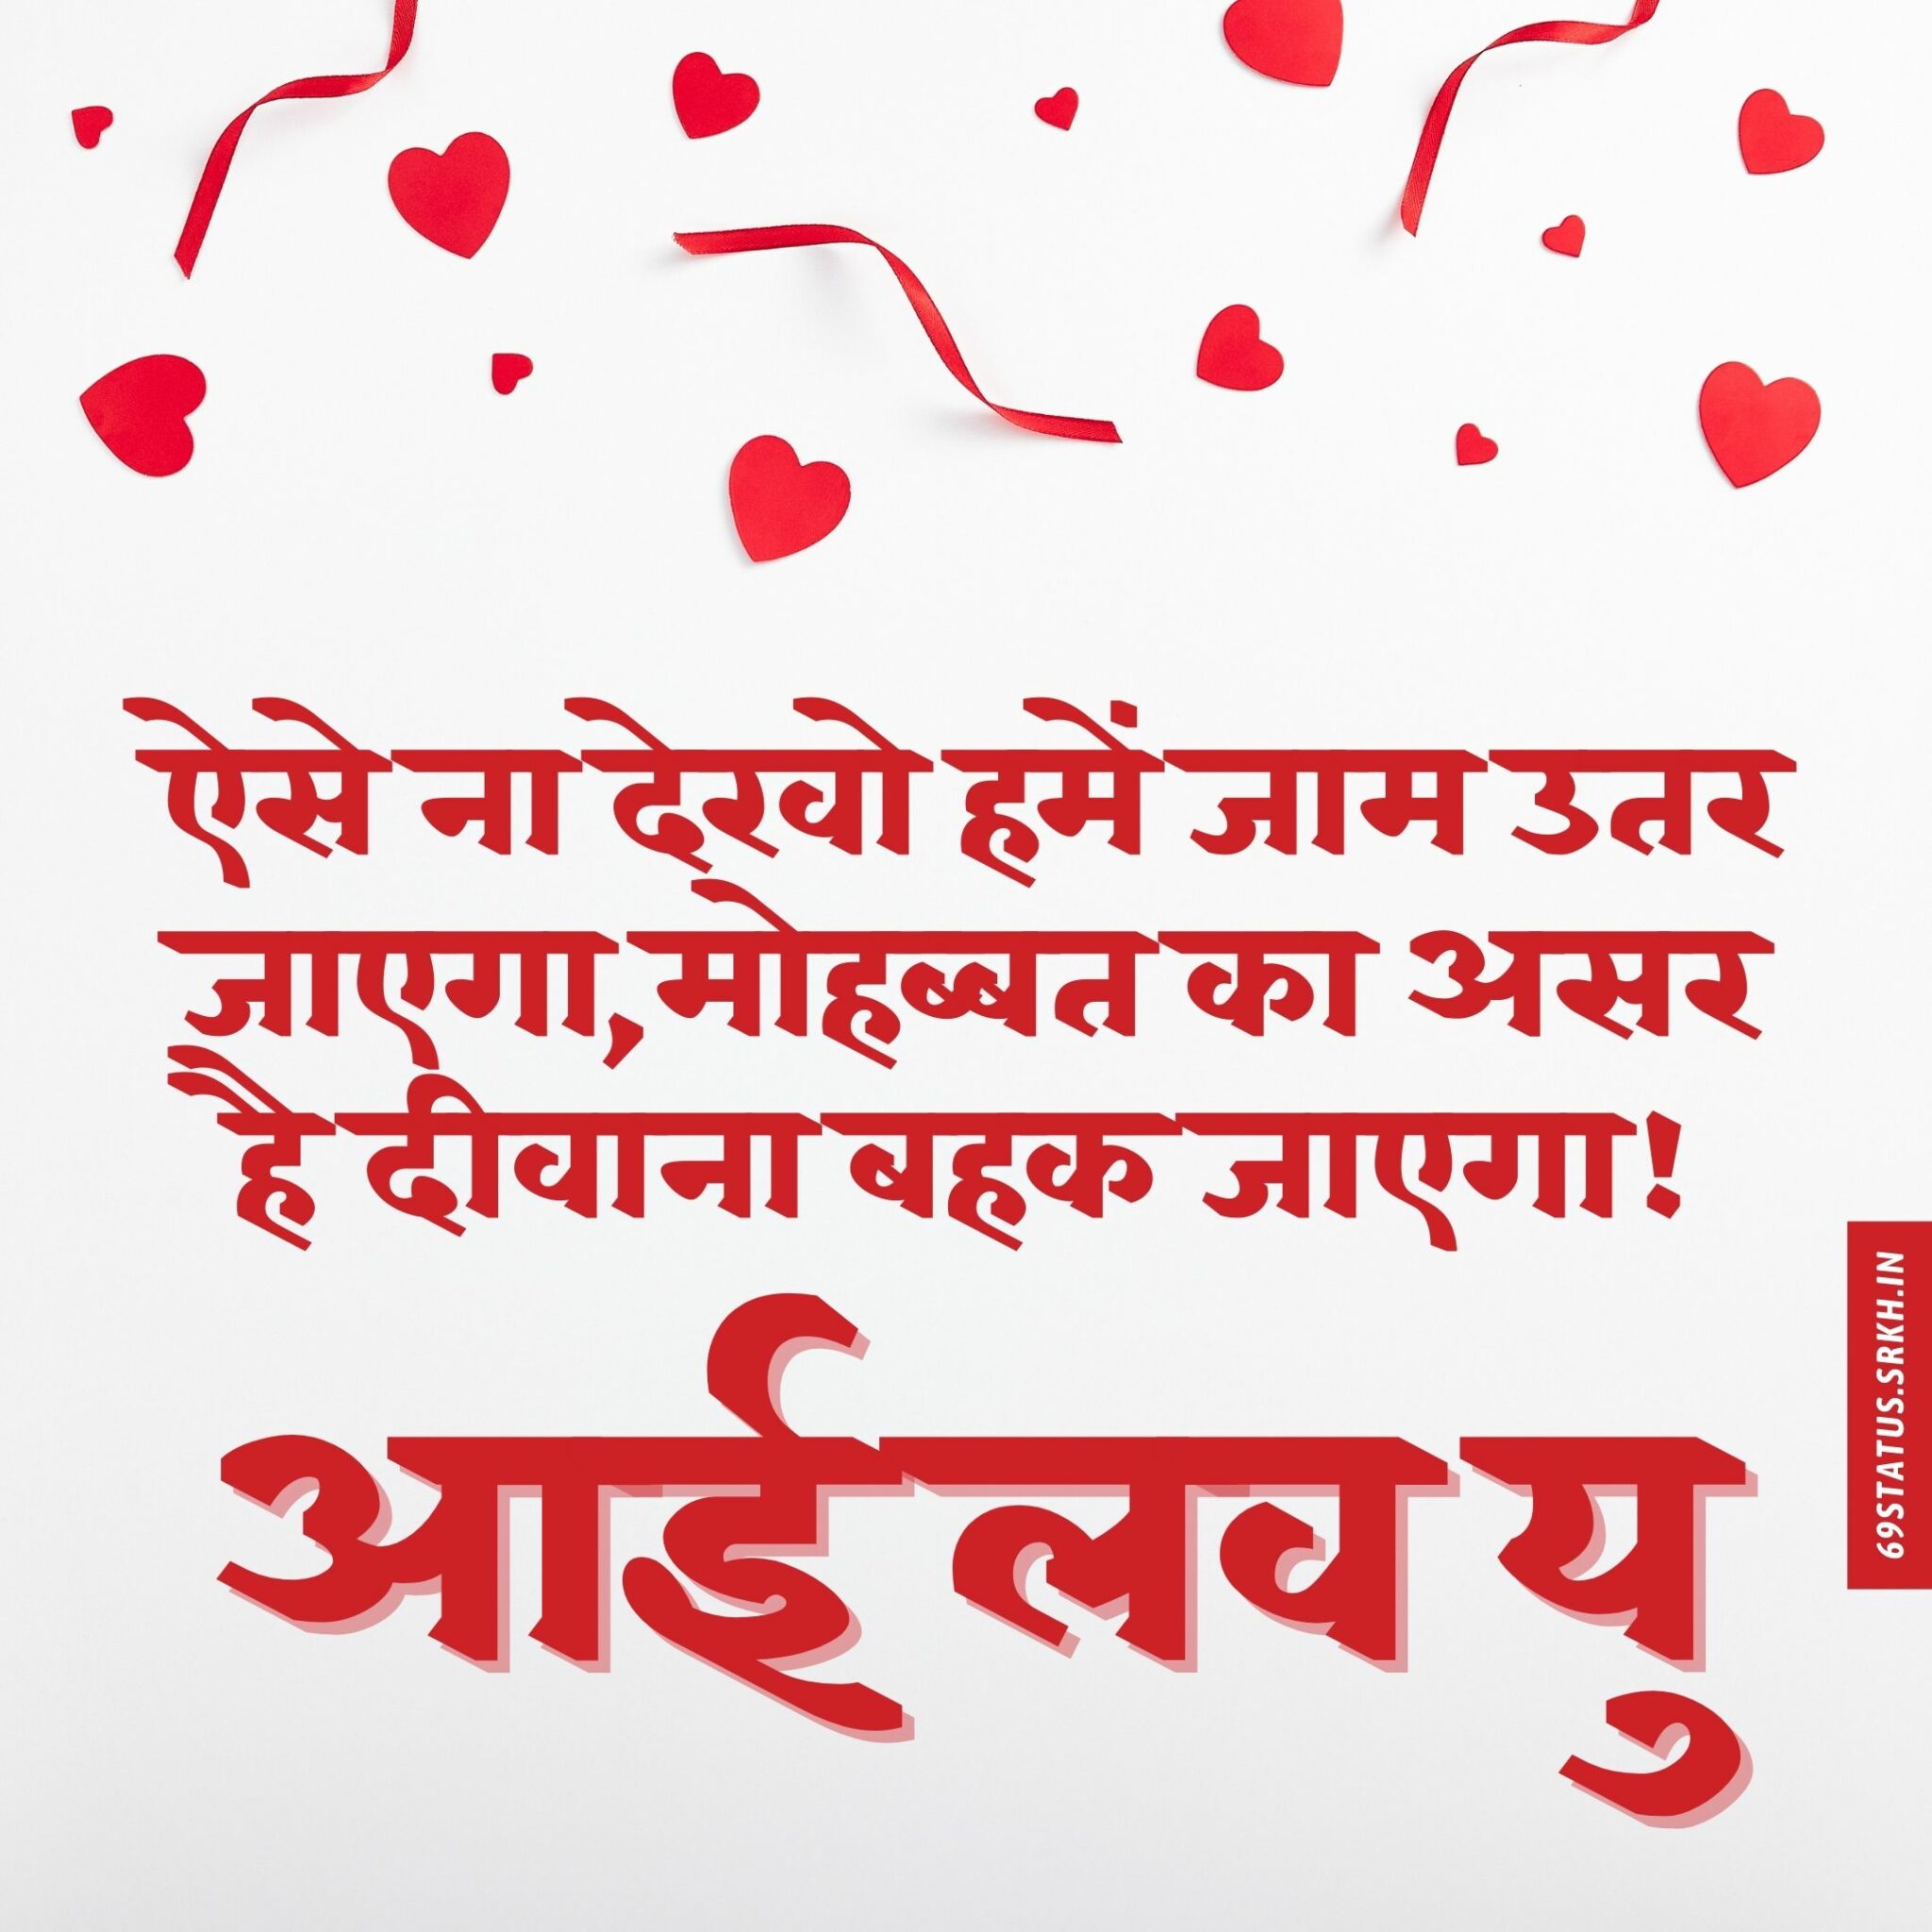 I Love You images with quotes in hindi hd